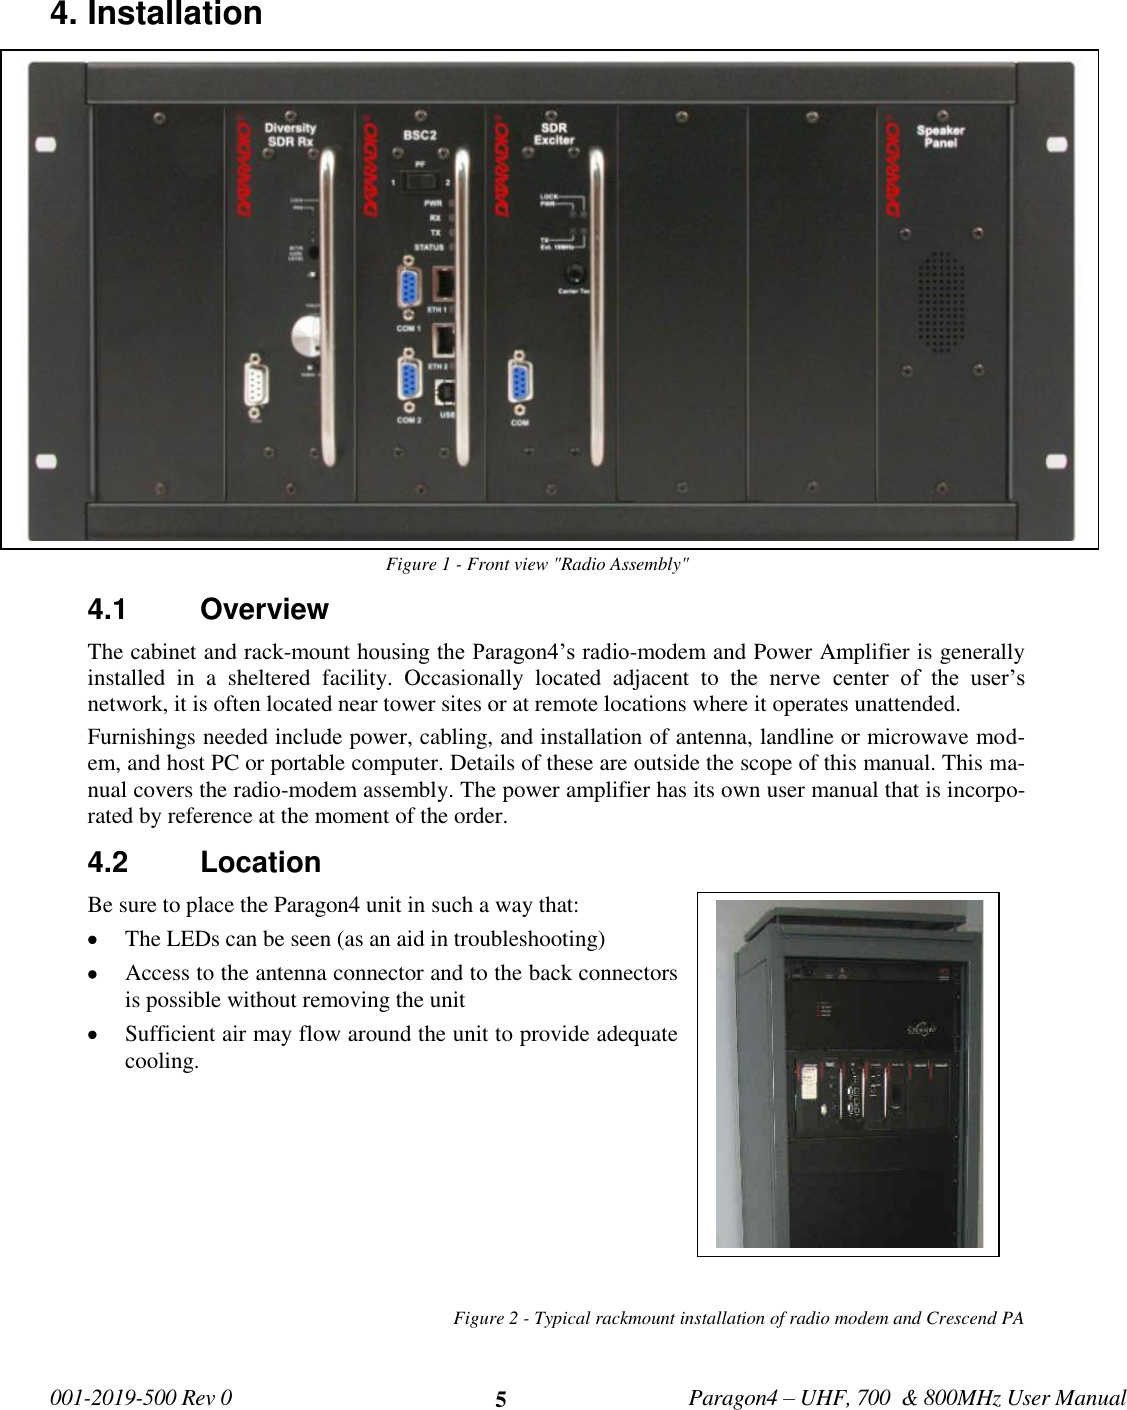   001-2019-500 Rev 0         Paragon4 – UHF, 700  &amp; 800MHz User Manual     5 4. Installation Figure 1 - Front view &quot;Radio Assembly&quot; 4.1  Overview The cabinet and rack-mount housing the Paragon4’s radio-modem and Power Amplifier is generally installed  in  a  sheltered  facility.  Occasionally  located  adjacent  to  the  nerve  center  of  the  user’s network, it is often located near tower sites or at remote locations where it operates unattended. Furnishings needed include power, cabling, and installation of antenna, landline or microwave mod-em, and host PC or portable computer. Details of these are outside the scope of this manual. This ma-nual covers the radio-modem assembly. The power amplifier has its own user manual that is incorpo-rated by reference at the moment of the order. 4.2  Location Be sure to place the Paragon4 unit in such a way that:  The LEDs can be seen (as an aid in troubleshooting)  Access to the antenna connector and to the back connectors is possible without removing the unit   Sufficient air may flow around the unit to provide adequate cooling.         Figure 2 - Typical rackmount installation of radio modem and Crescend PA       